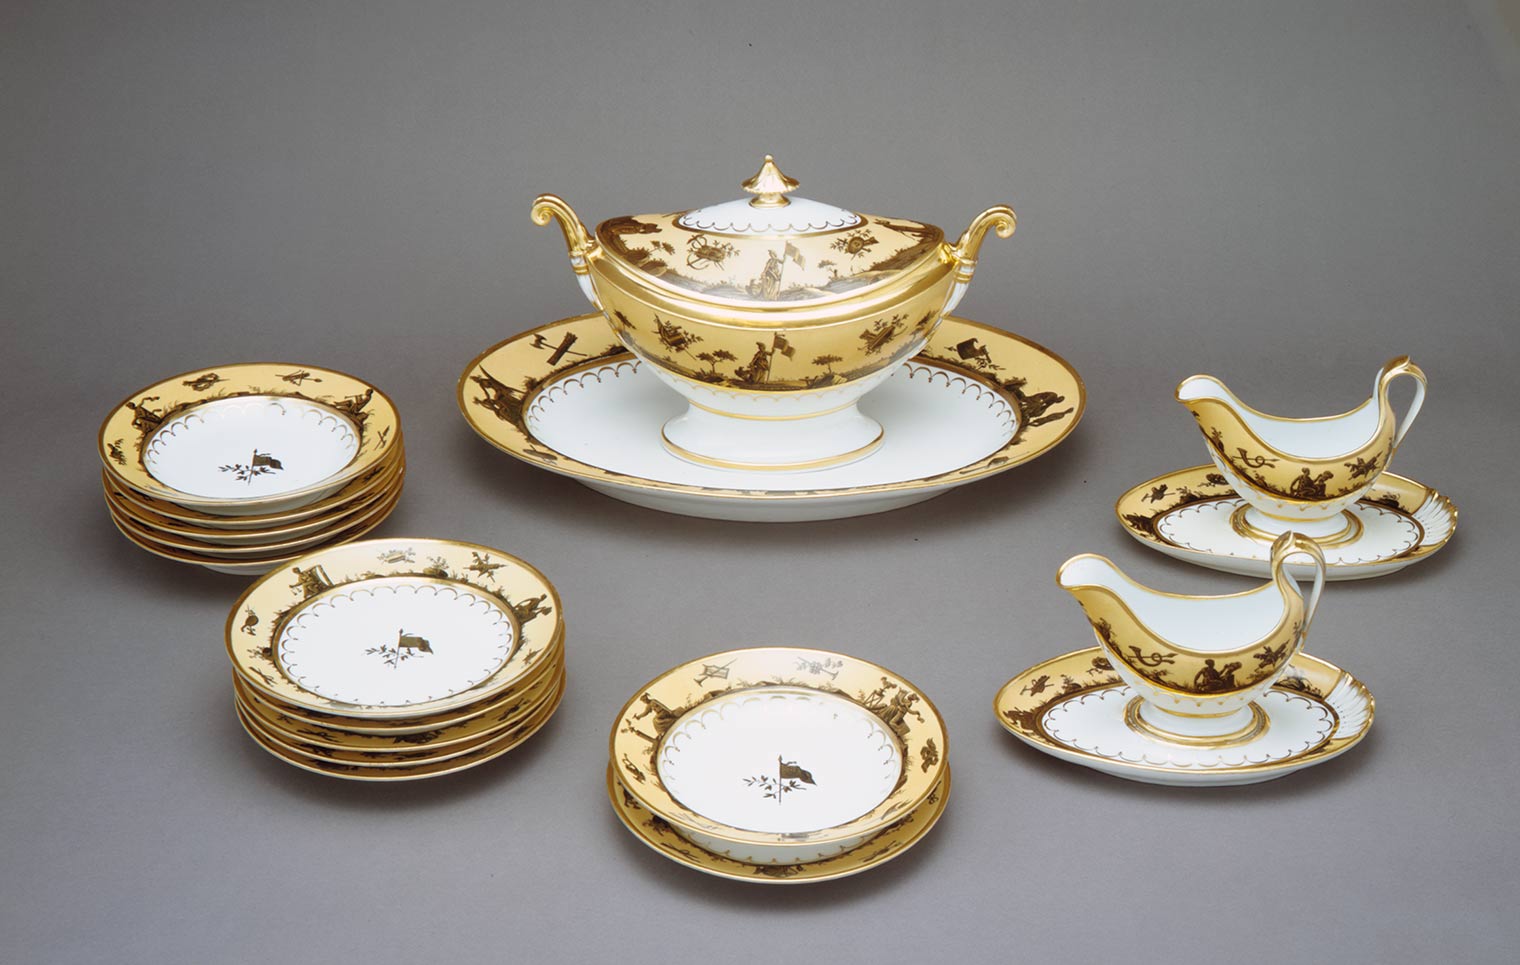 Early 19th-century porcelain dining set with gold embellishment and patriotic details